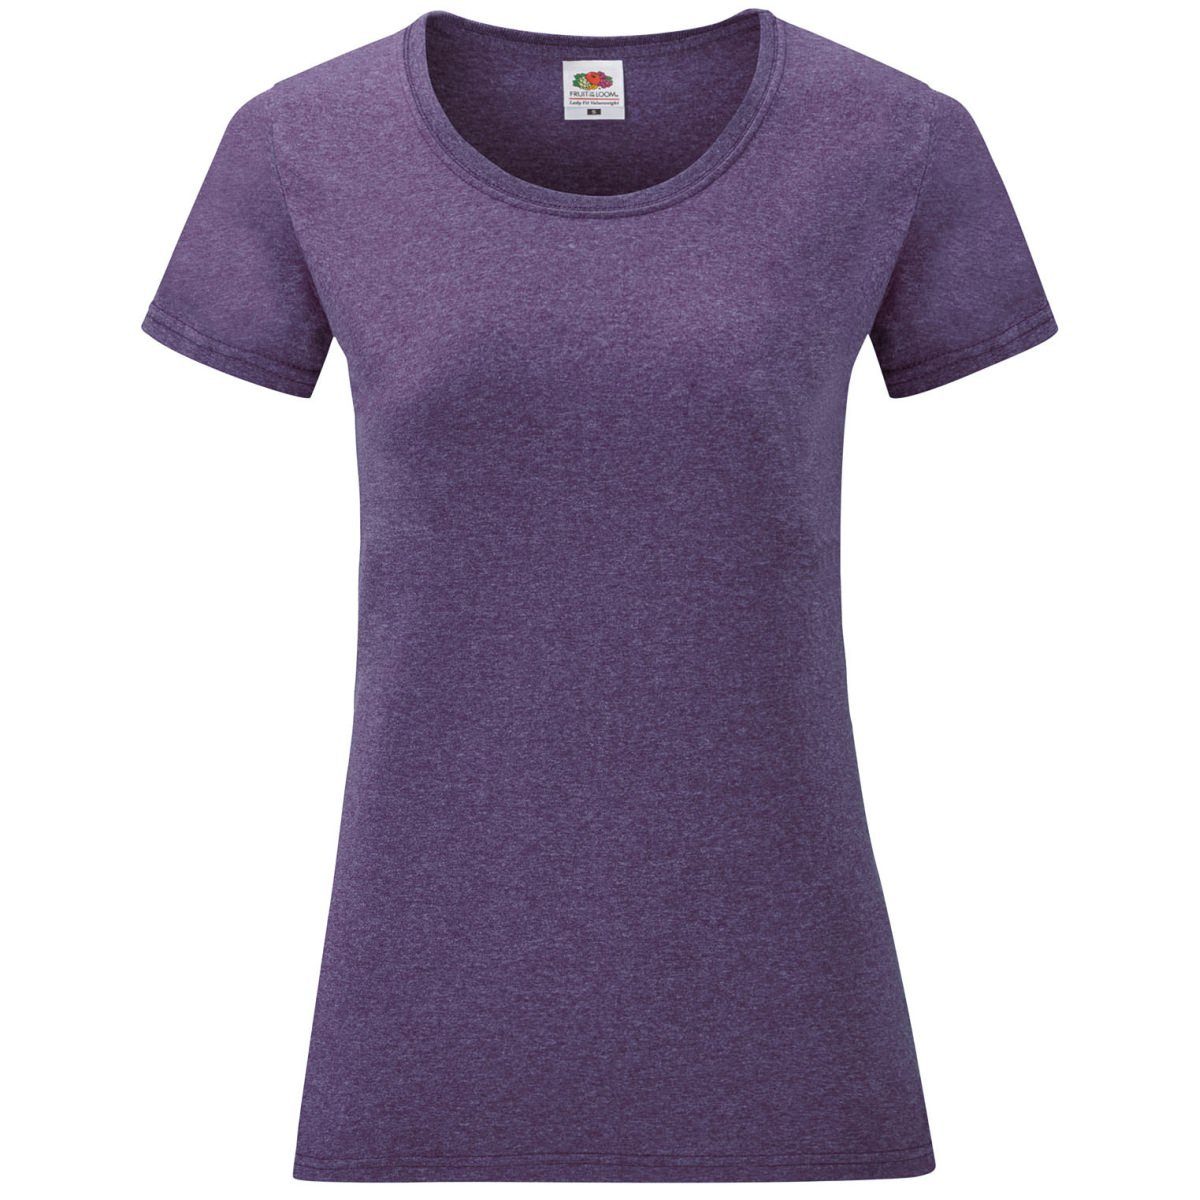 Fruit of the Loom Rundhalsshirt Fruit of the Loom Valueweight T Lady-Fit violett meliert